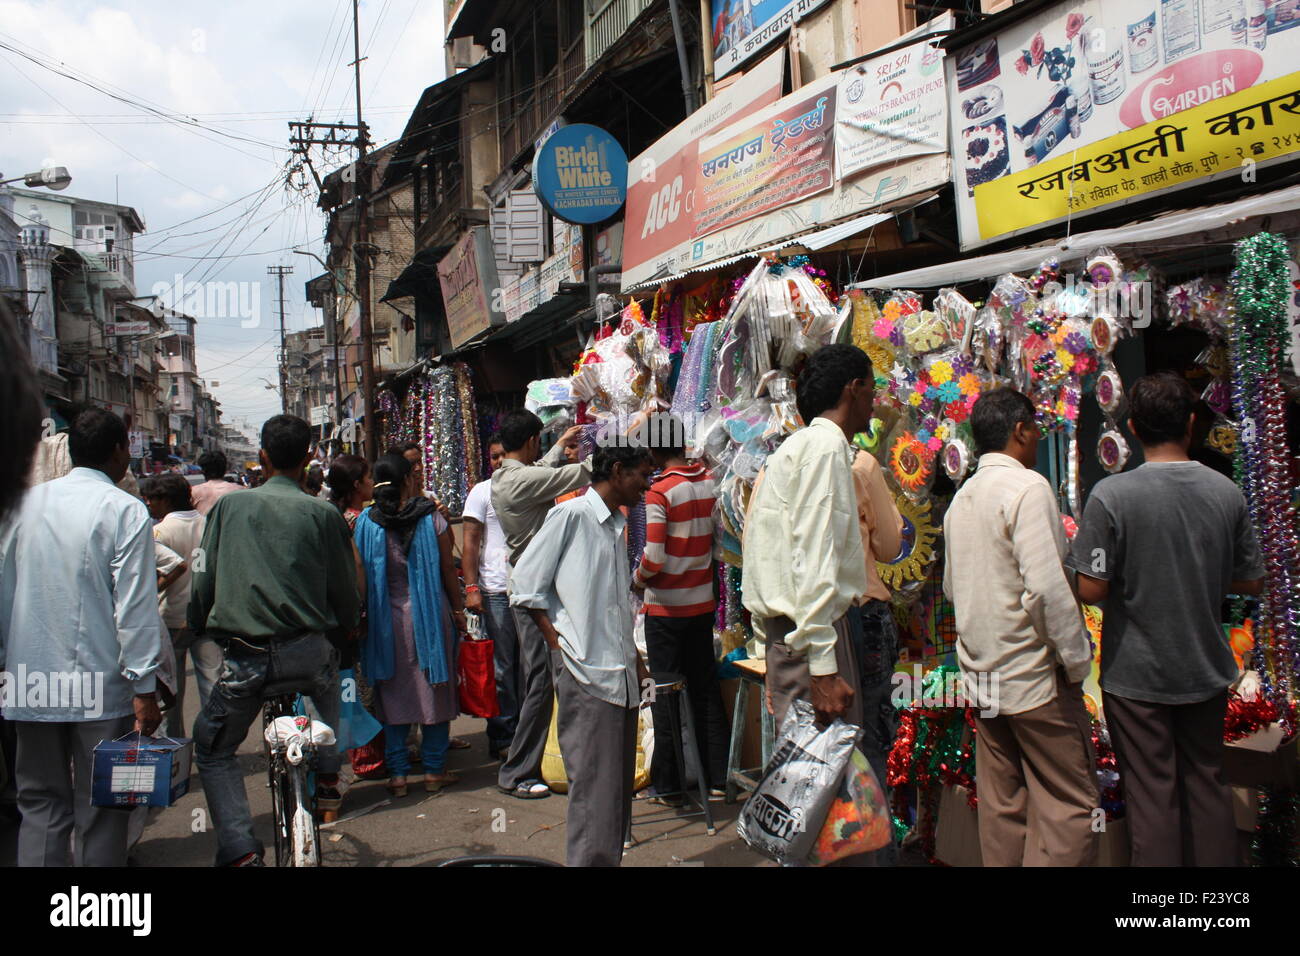 Busy Indian Market Stock Photo